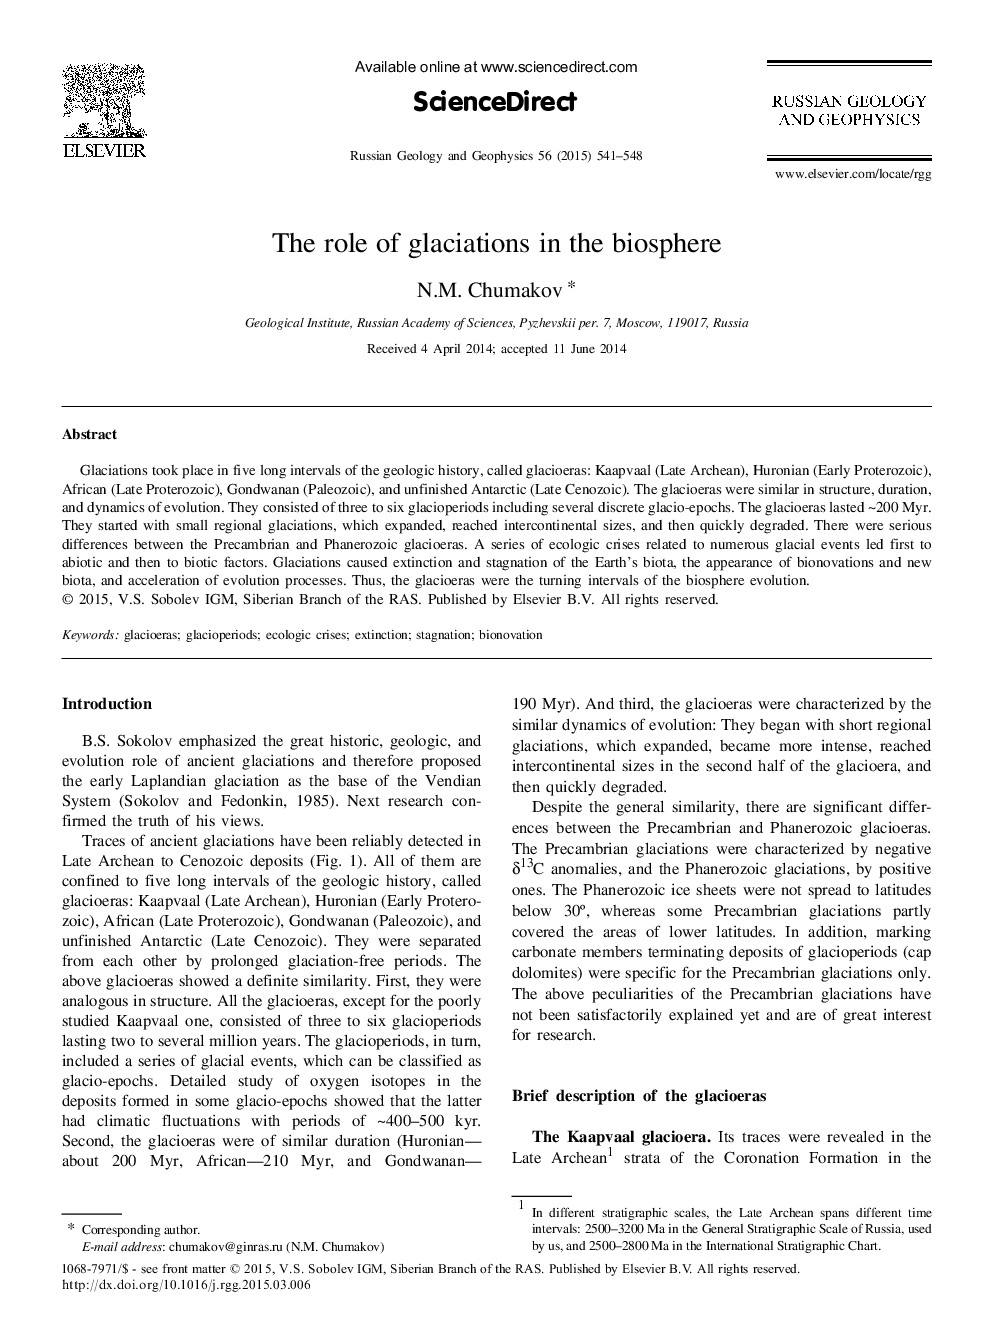 The role of glaciations in the biosphere 